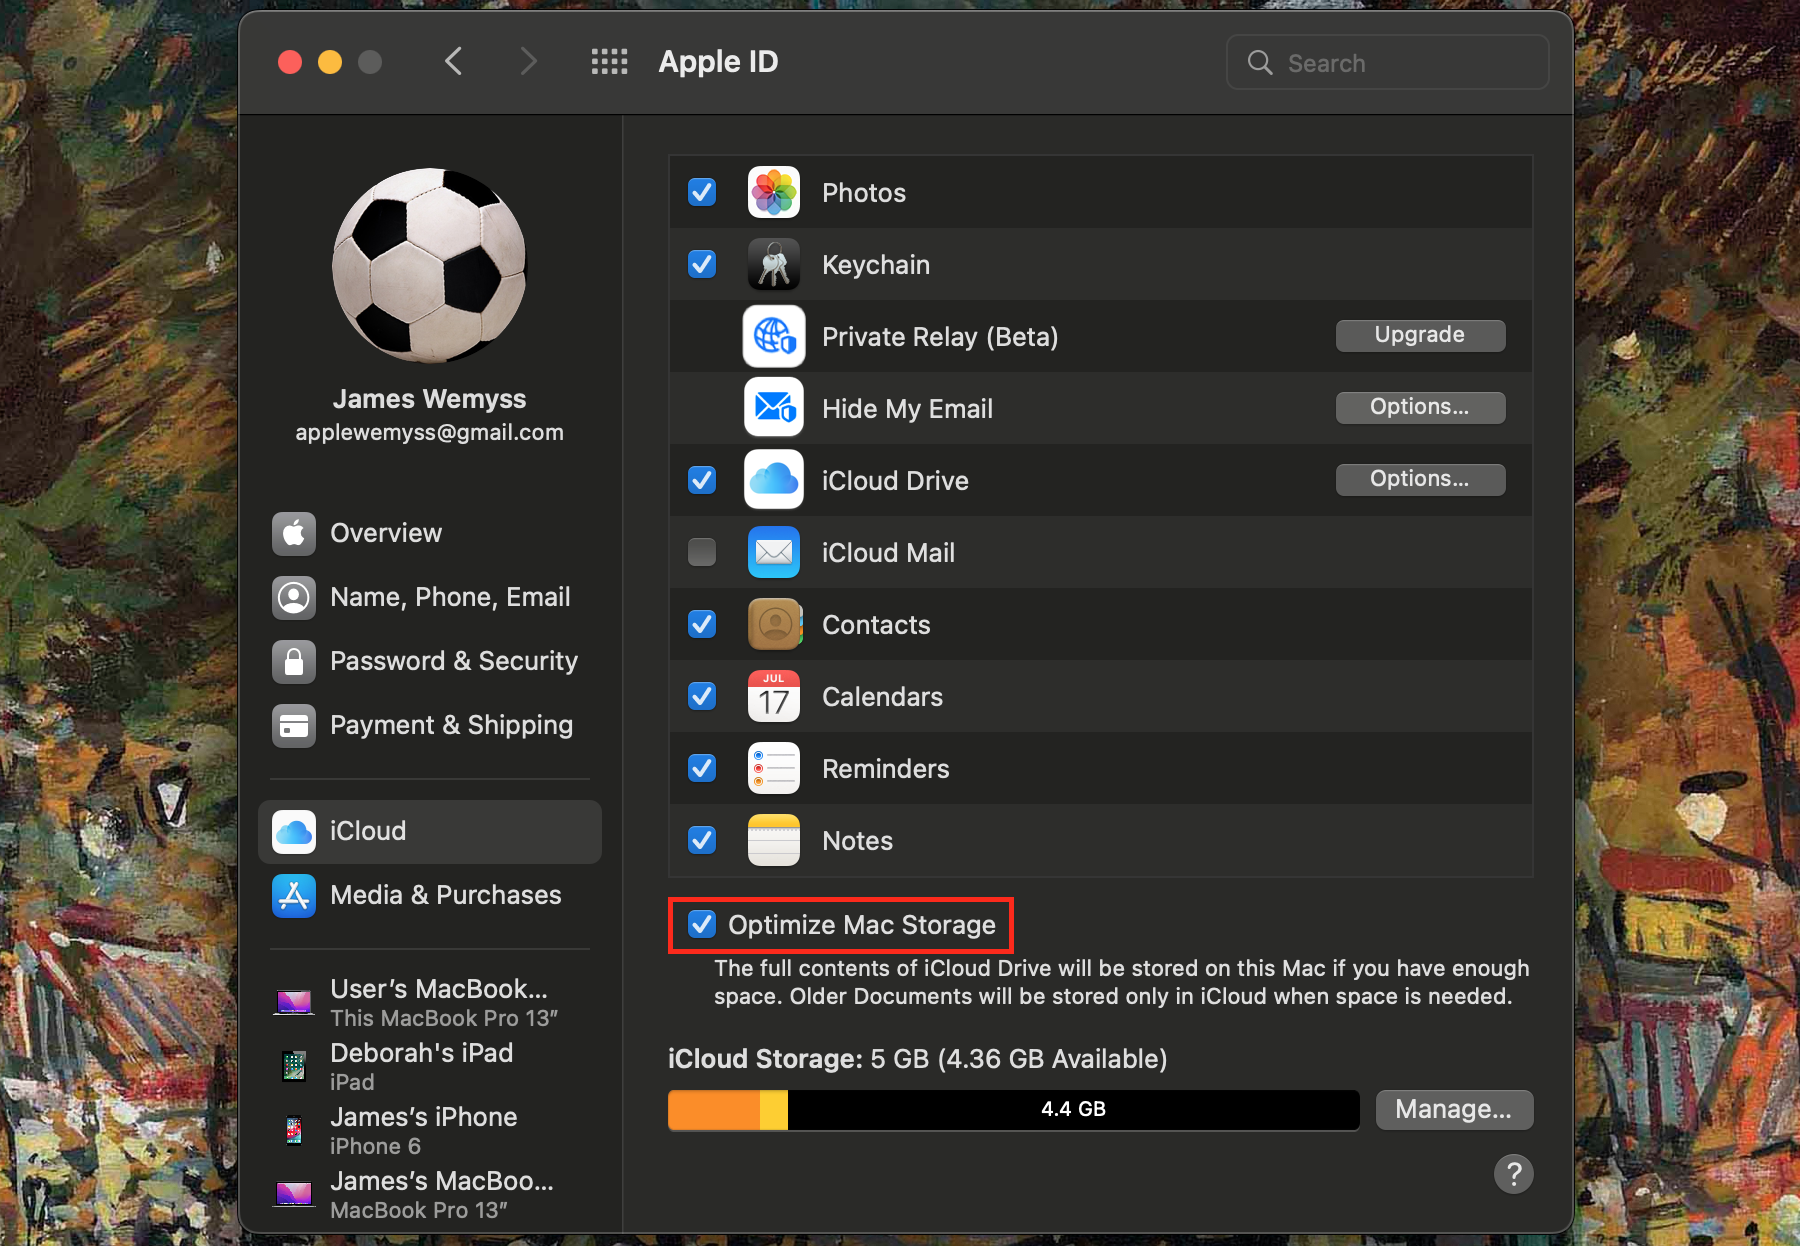 To remove purgeable space on macOS Mojave, disable the optimize Mac storage for iCloud feature by unticking the Optimize Mac Storage box in System Preferences > Apple ID.